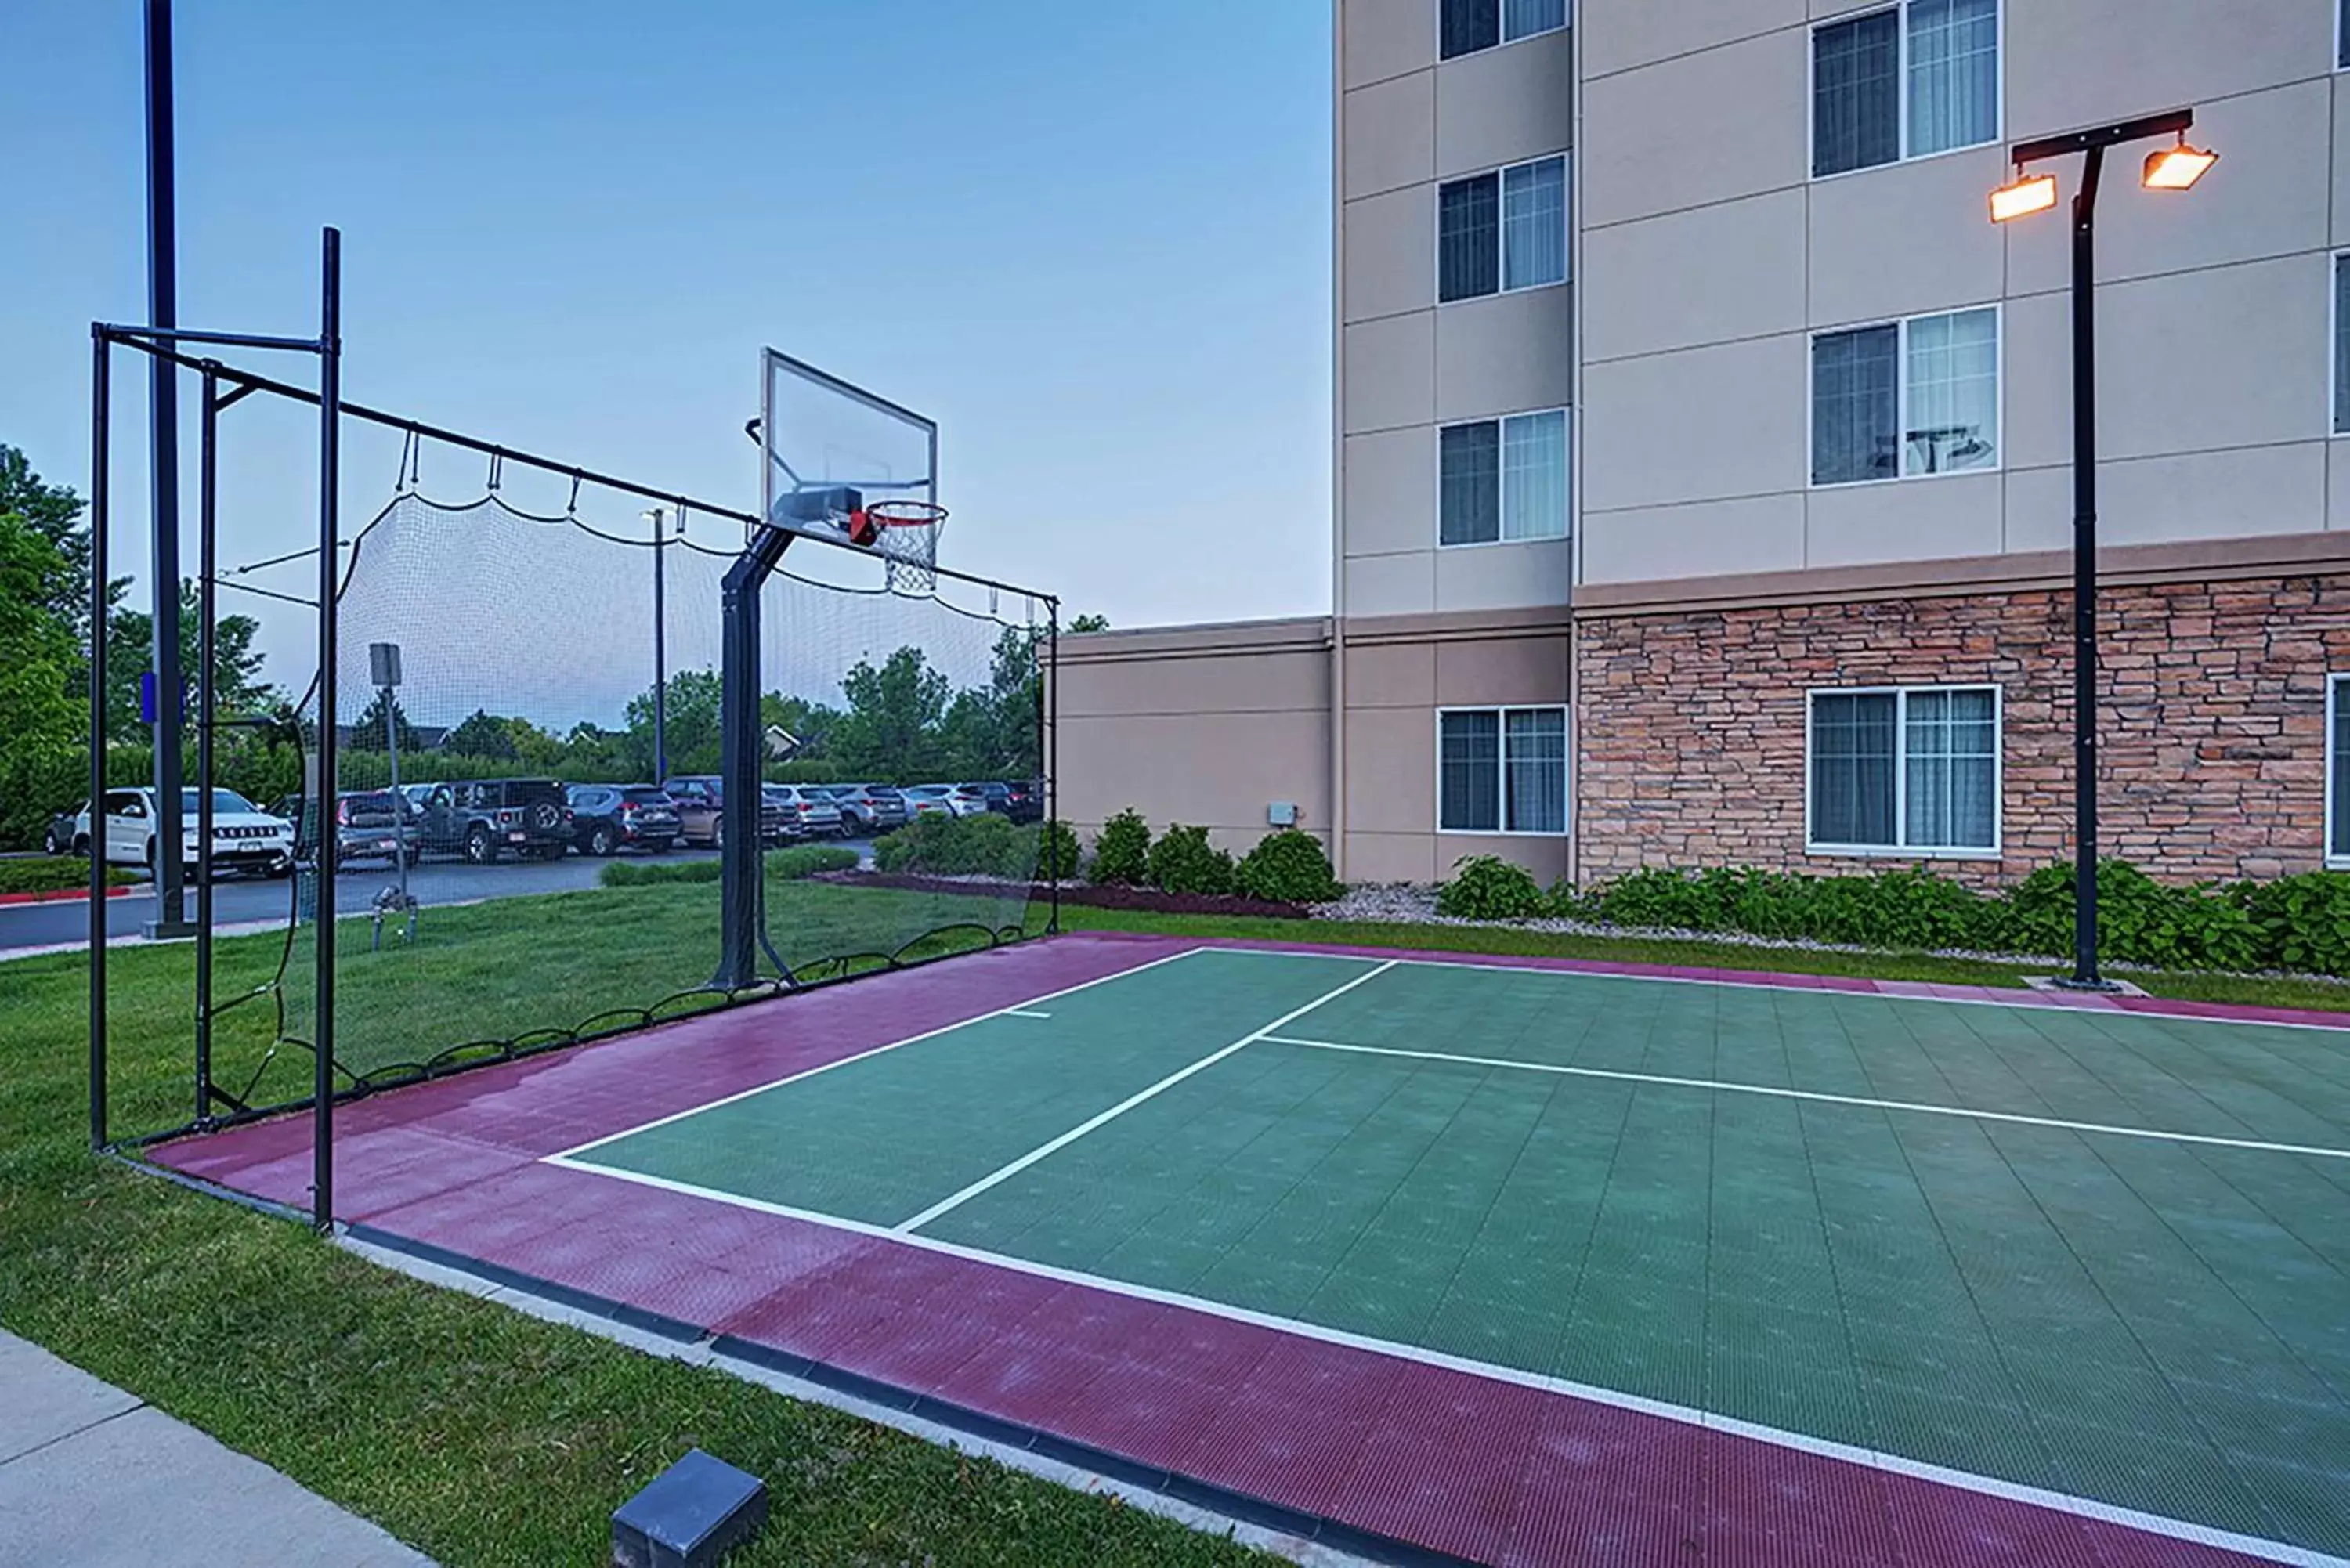 Property building, Tennis/Squash in Homewood Suites by Hilton Fort Collins